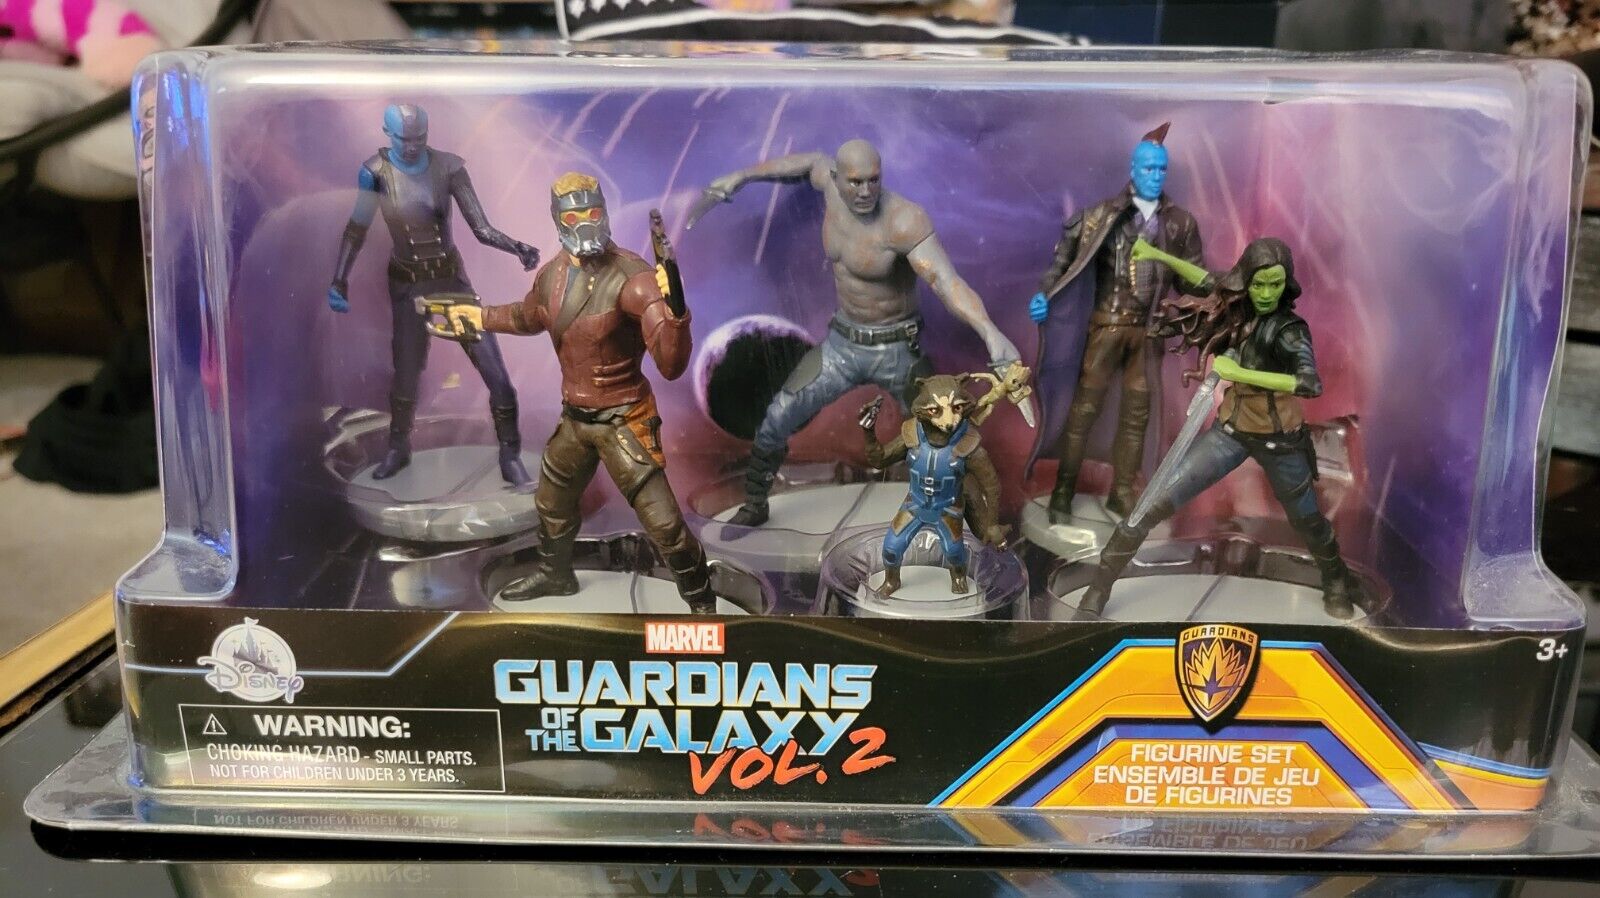 Disney Marvel Guardians Of The Galaxy Vol 2 Figurine Set Brand New In Hand Rare